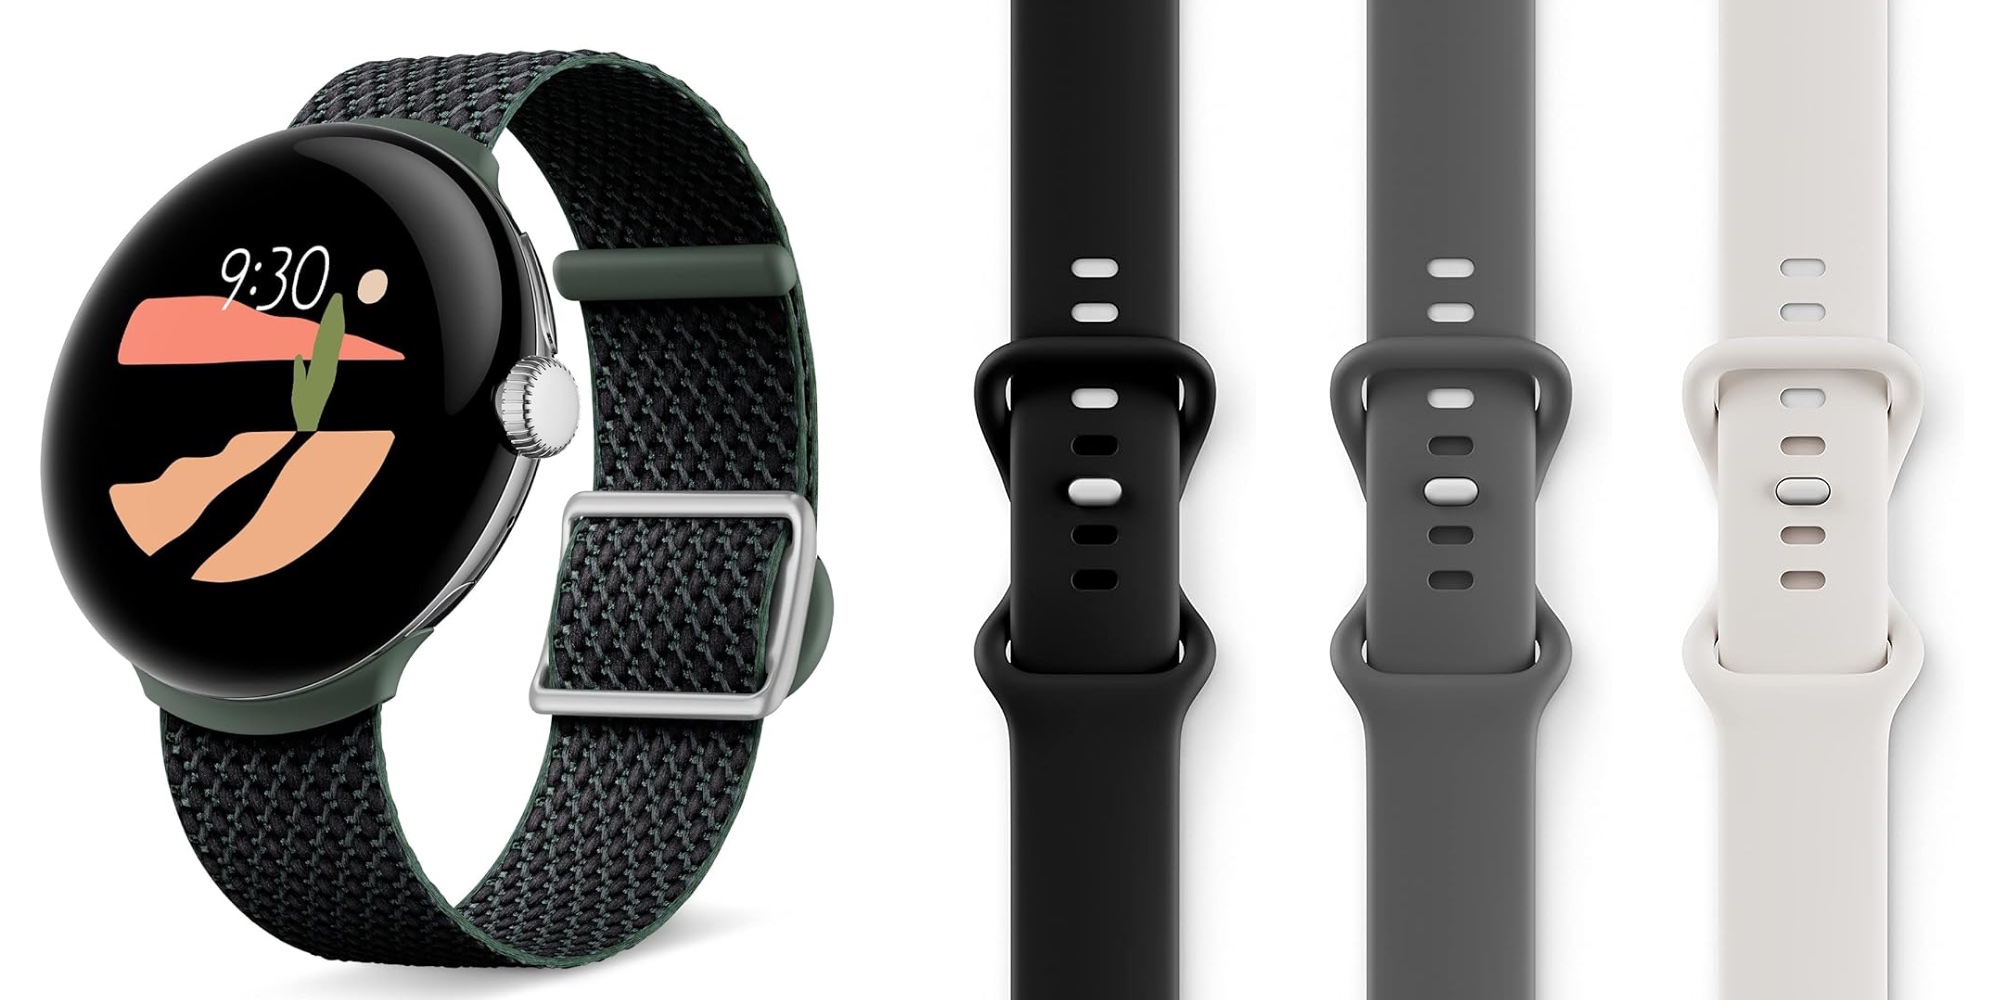 Accessorize your Pixel Watch 2 with official Google band deals from $34 at  Amazon